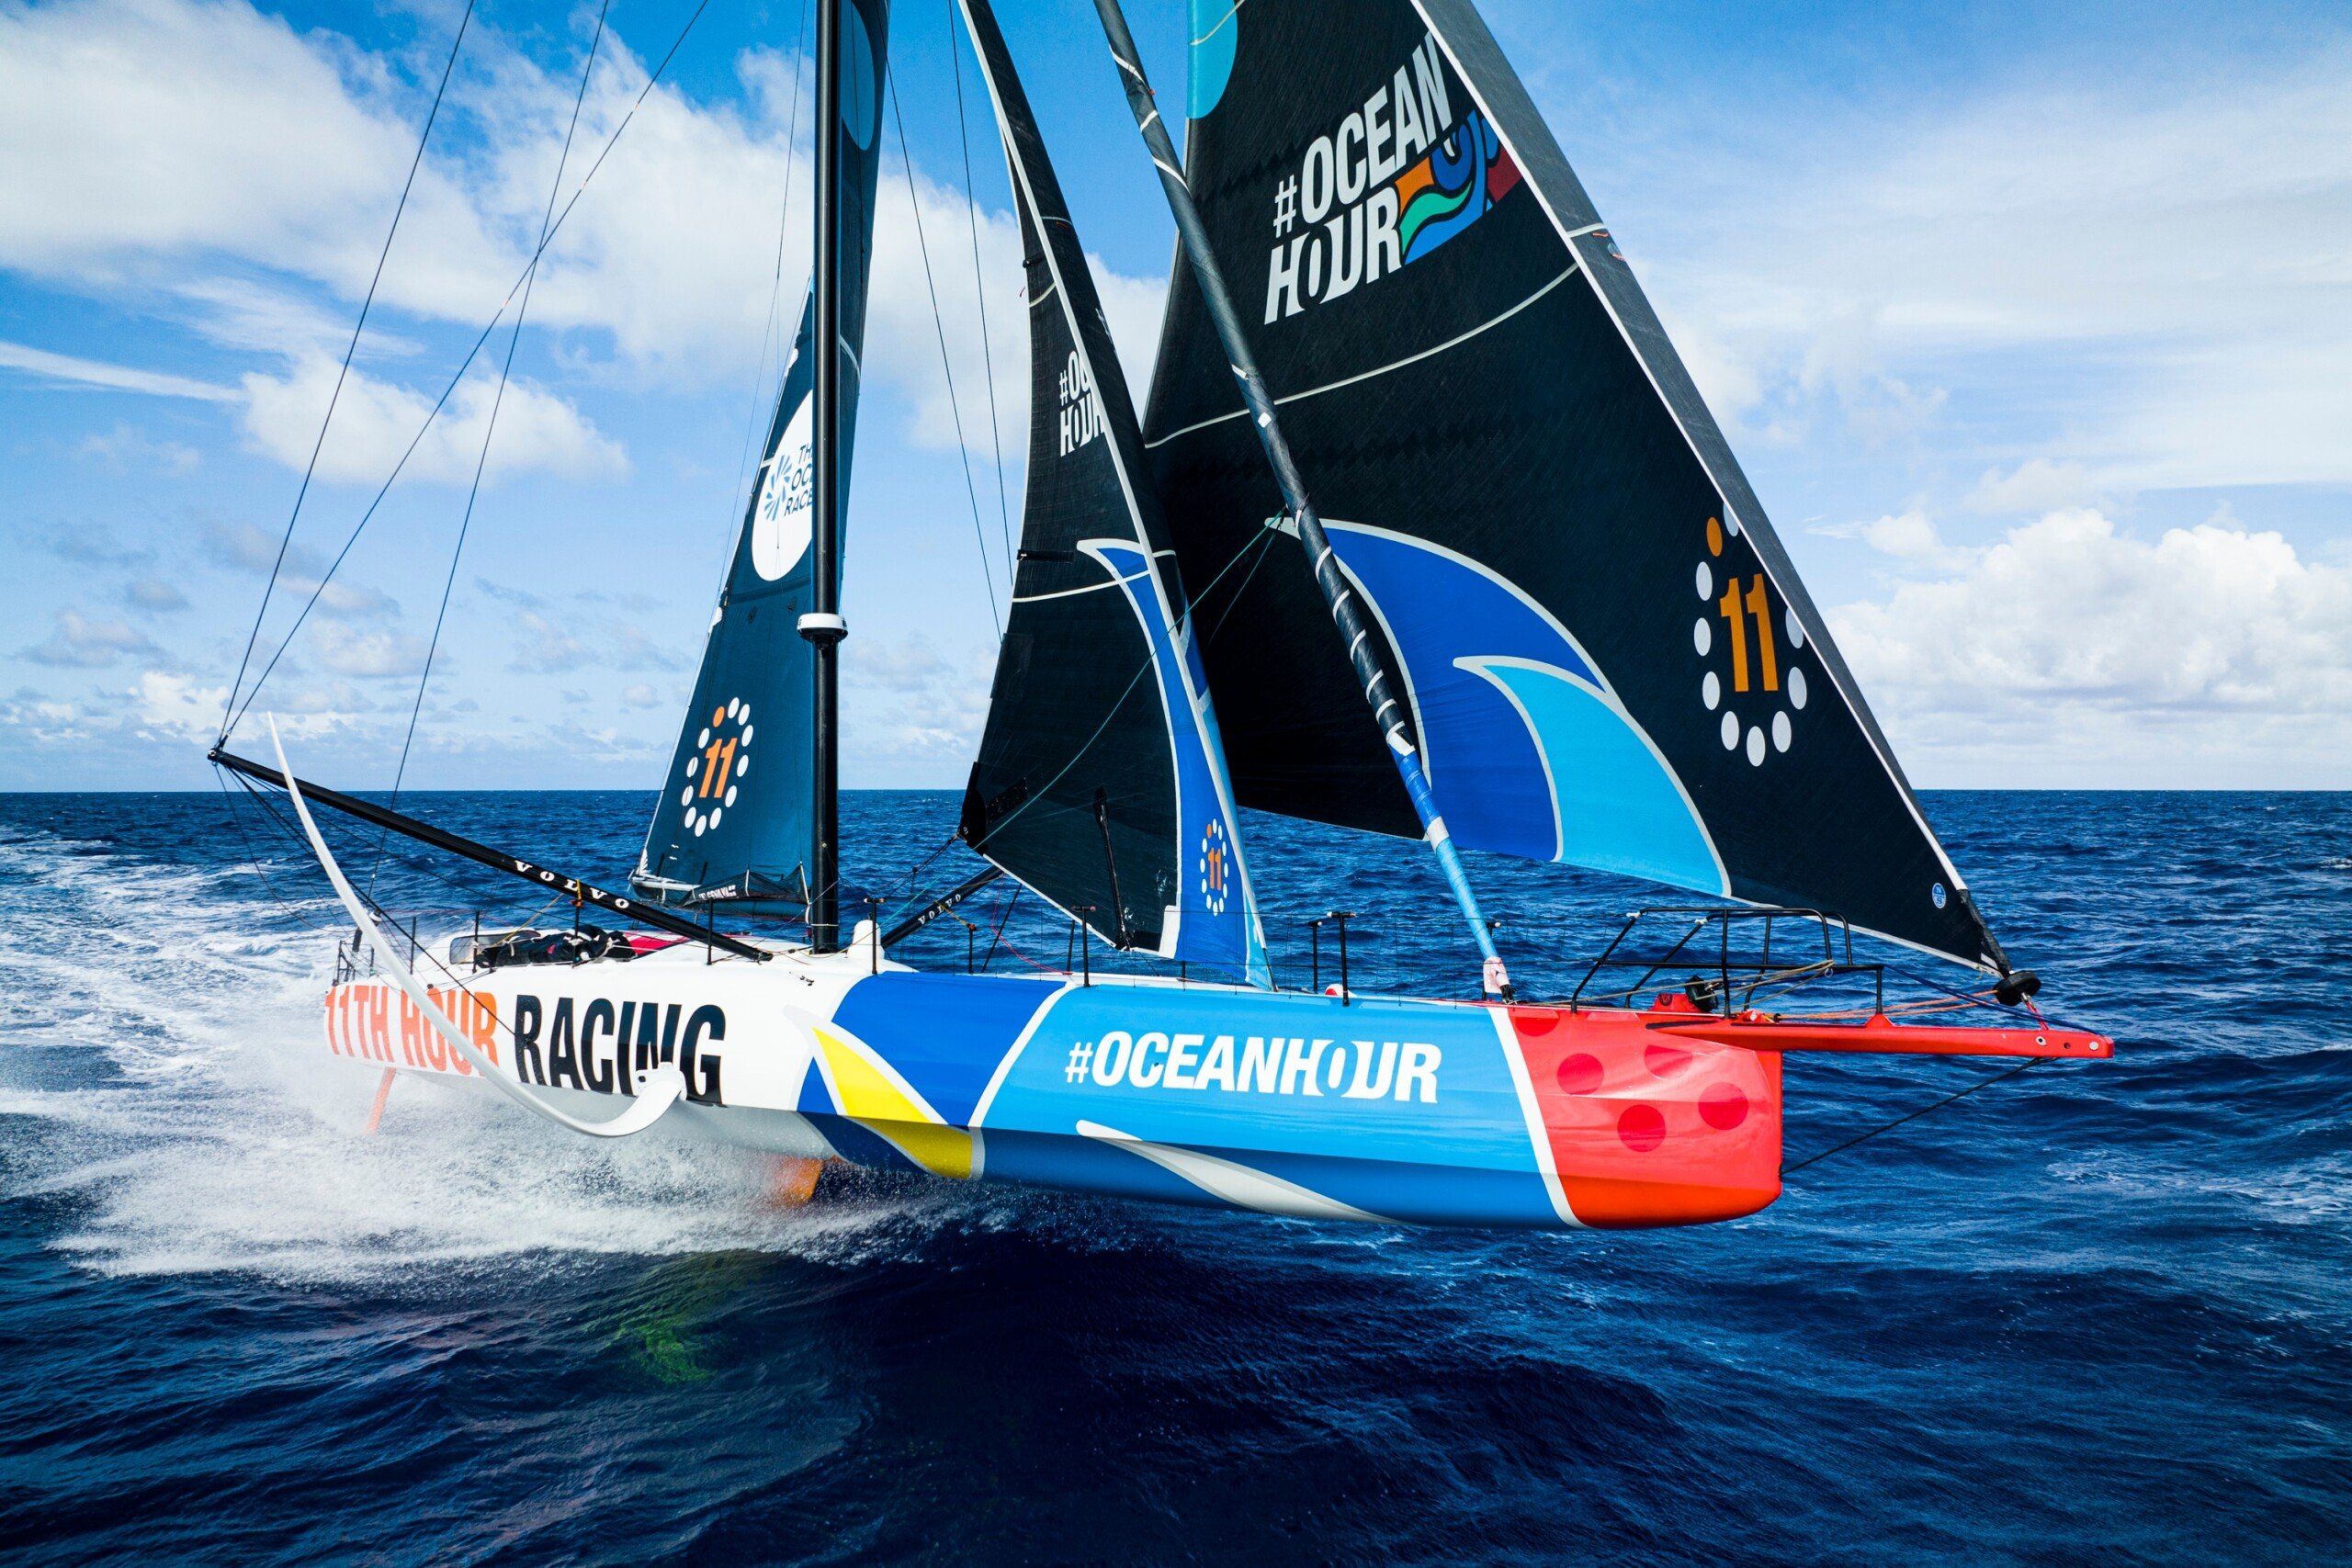 The Ocean Race Has Arrived in Newport. Here’s What You Need to Know